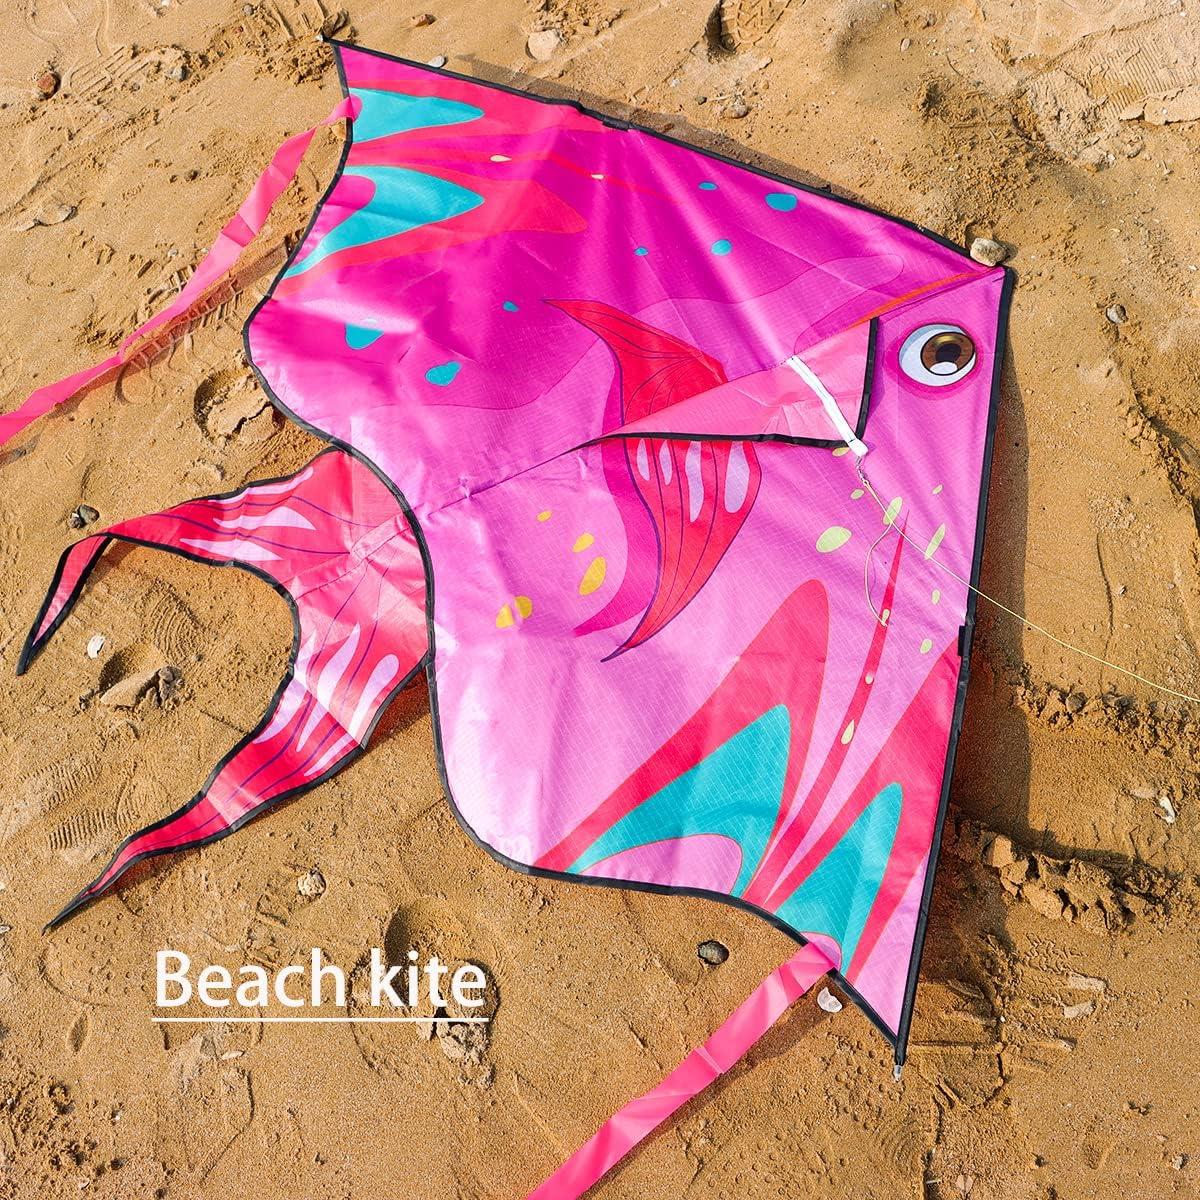 XENTUMI Fish Kite 2 Pack with String Kites for Kids & Adults Easy